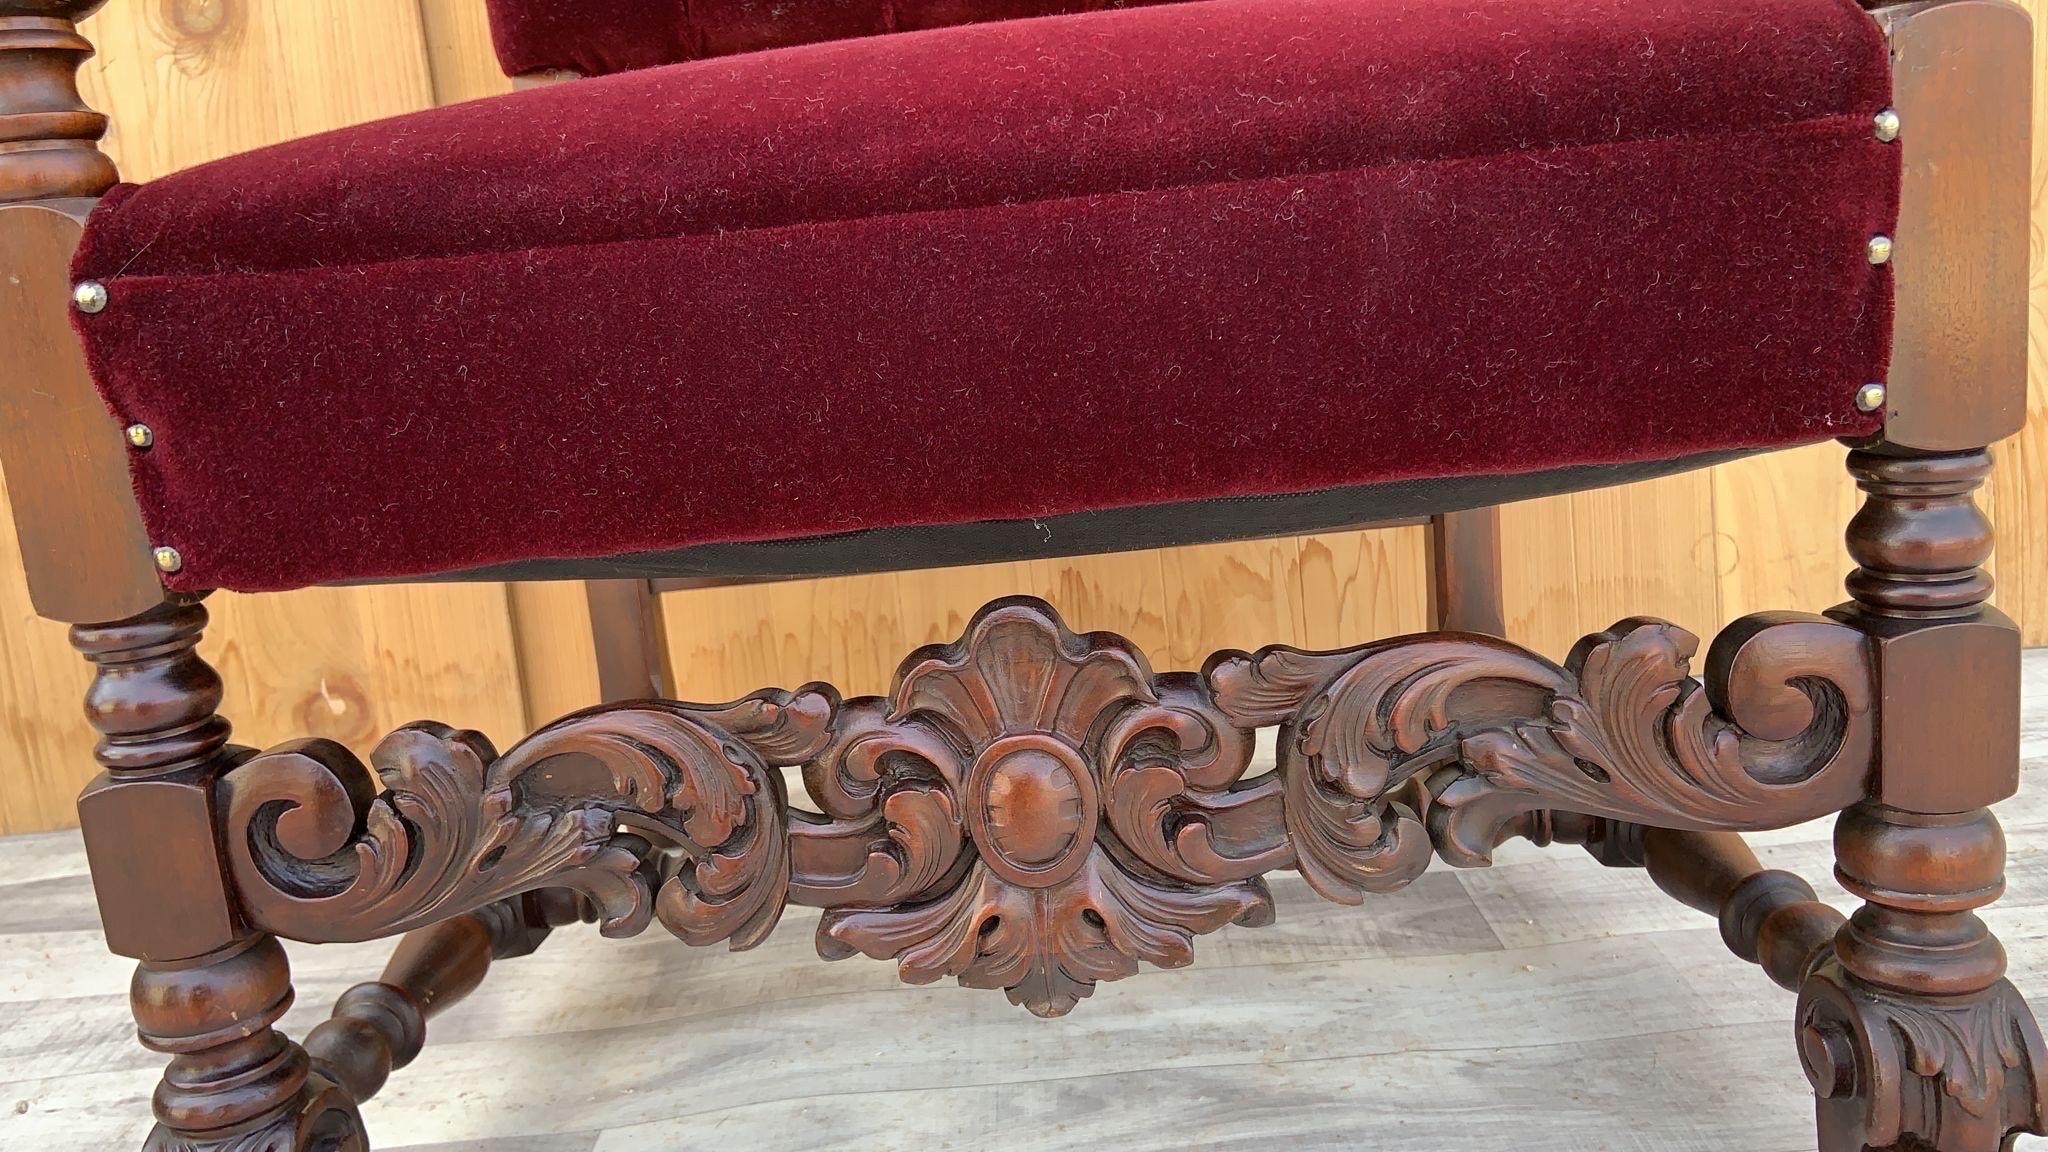 Antique French Regency Style Ornate Caved Walnut Throne Chairs Newly Upholstered in a Burgundy Mohair - Pair

Gorgeous Pair of French Regency Style Beautifully Ornate Hand Carved Acanthus Leaf Motif Finely Detailed Walnut High Back Throne Chairs